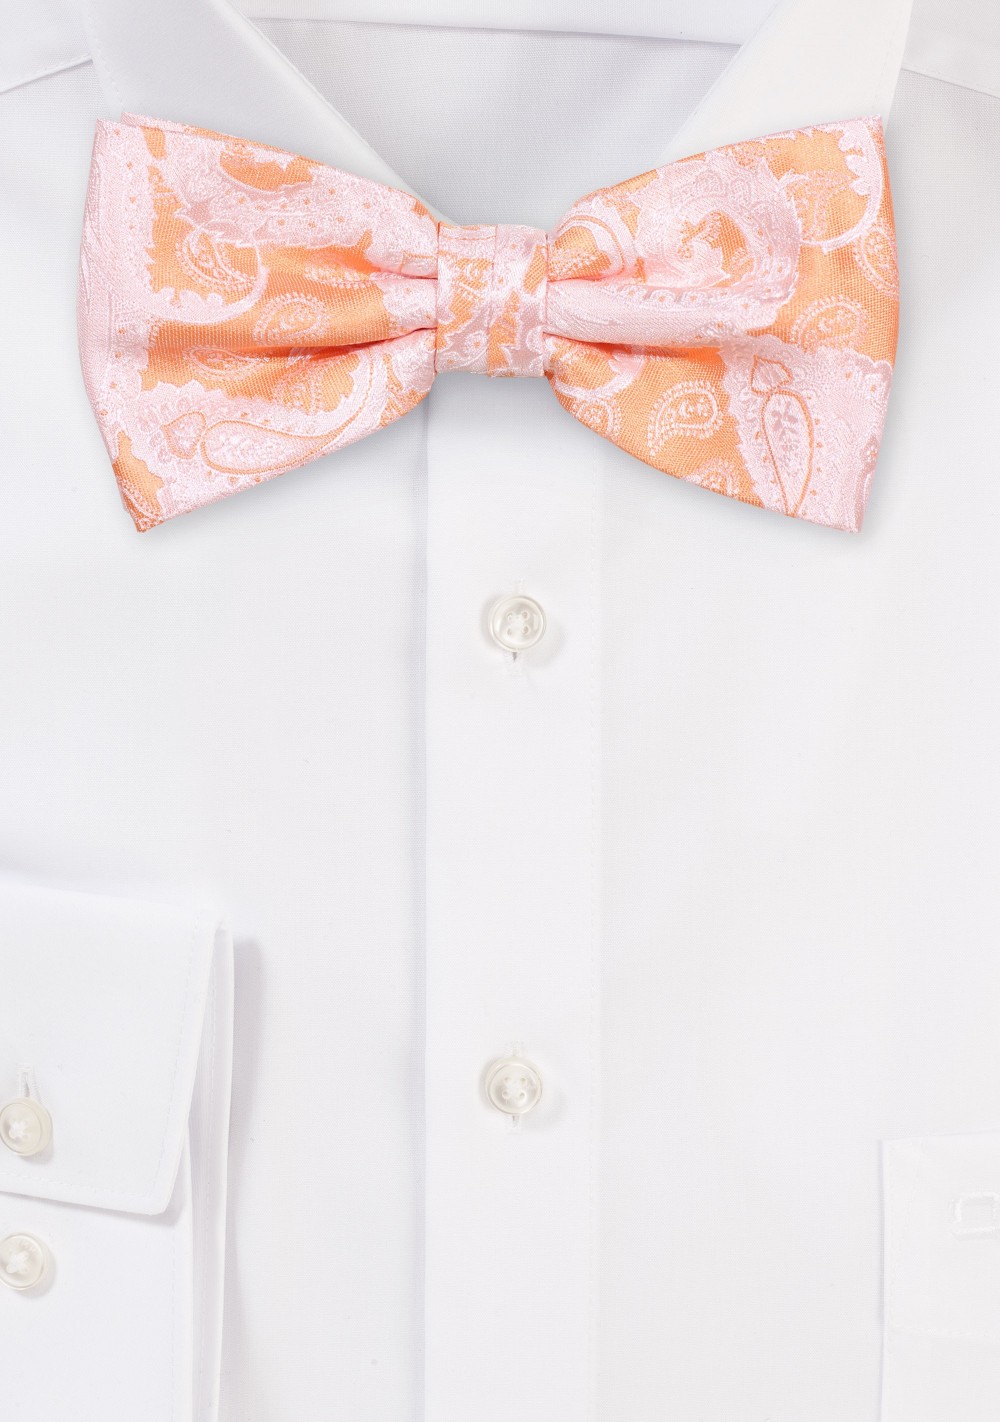 Orange and Silver Paisley Bow Tie